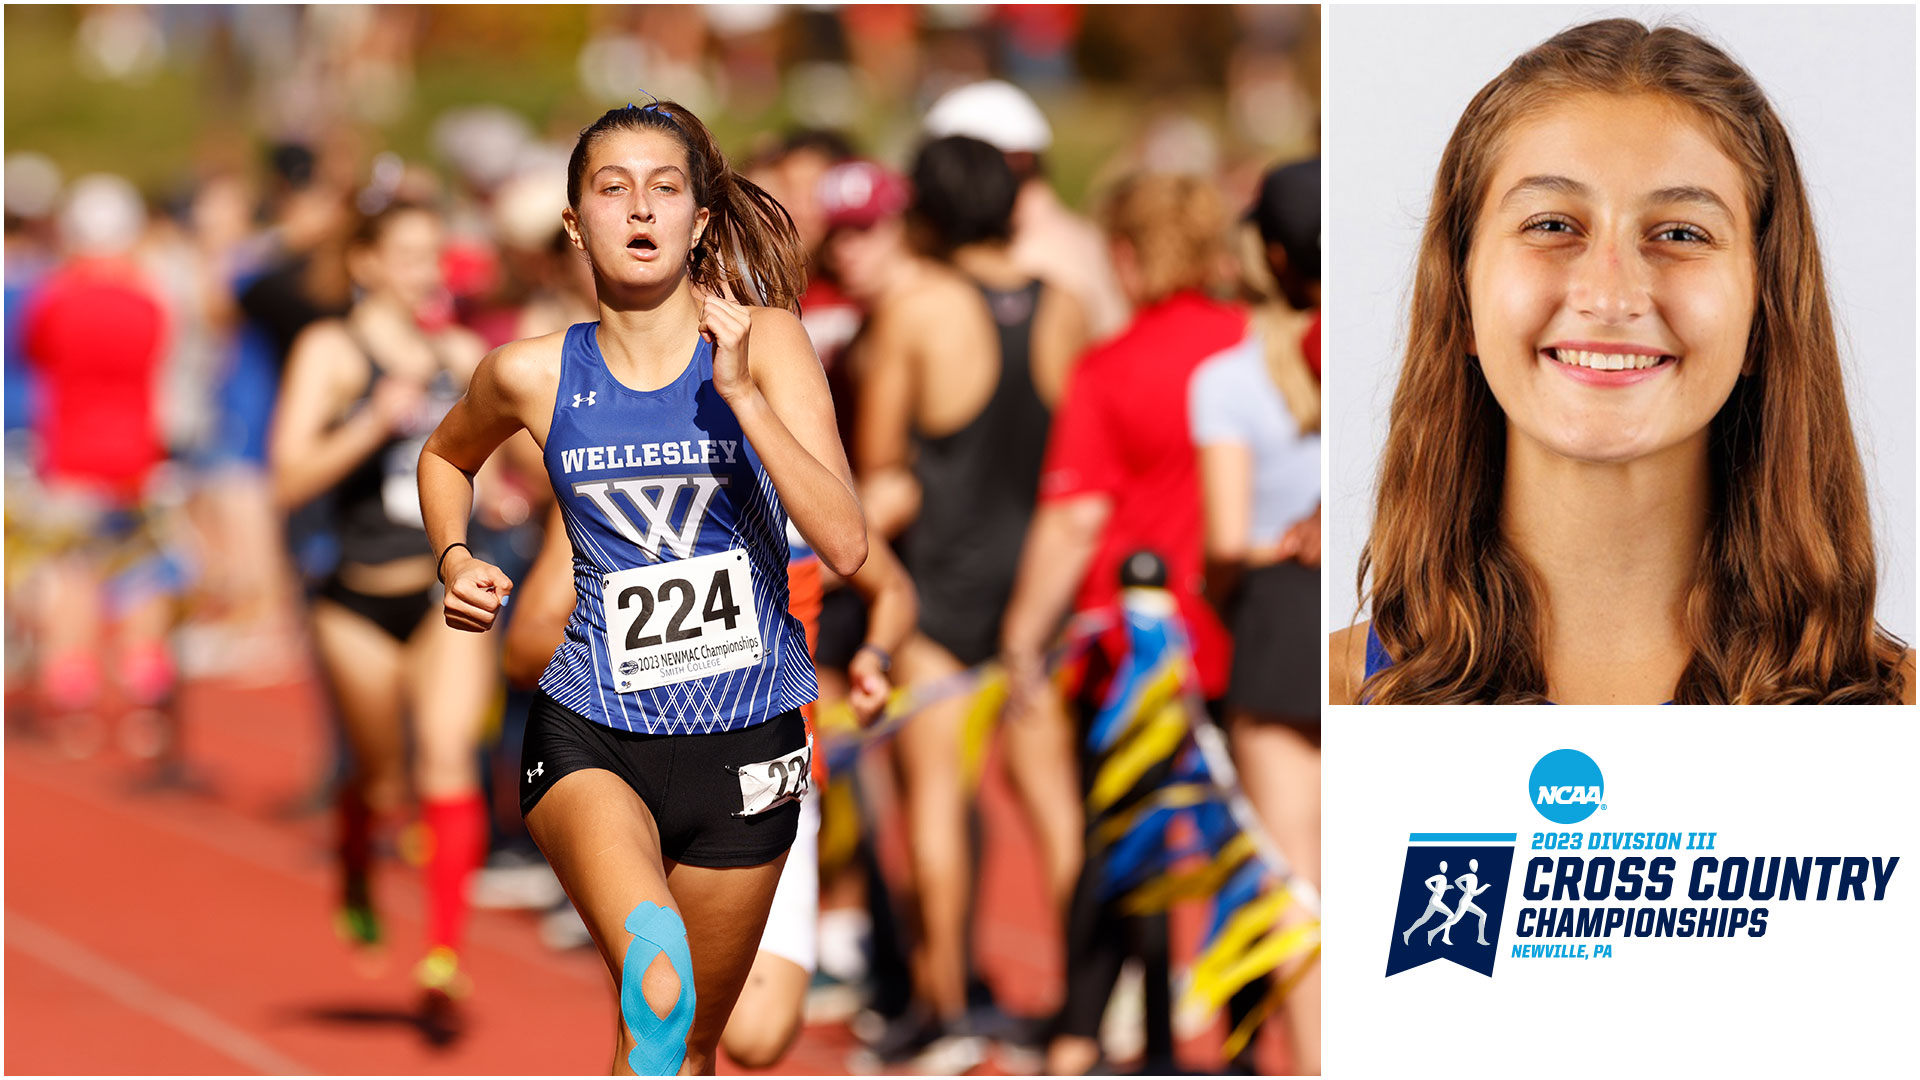 Ella Whinney '26 will represent Wellesley cross country at the 2023 NCAA Division III Cross Country Championships (Frank Poulin)